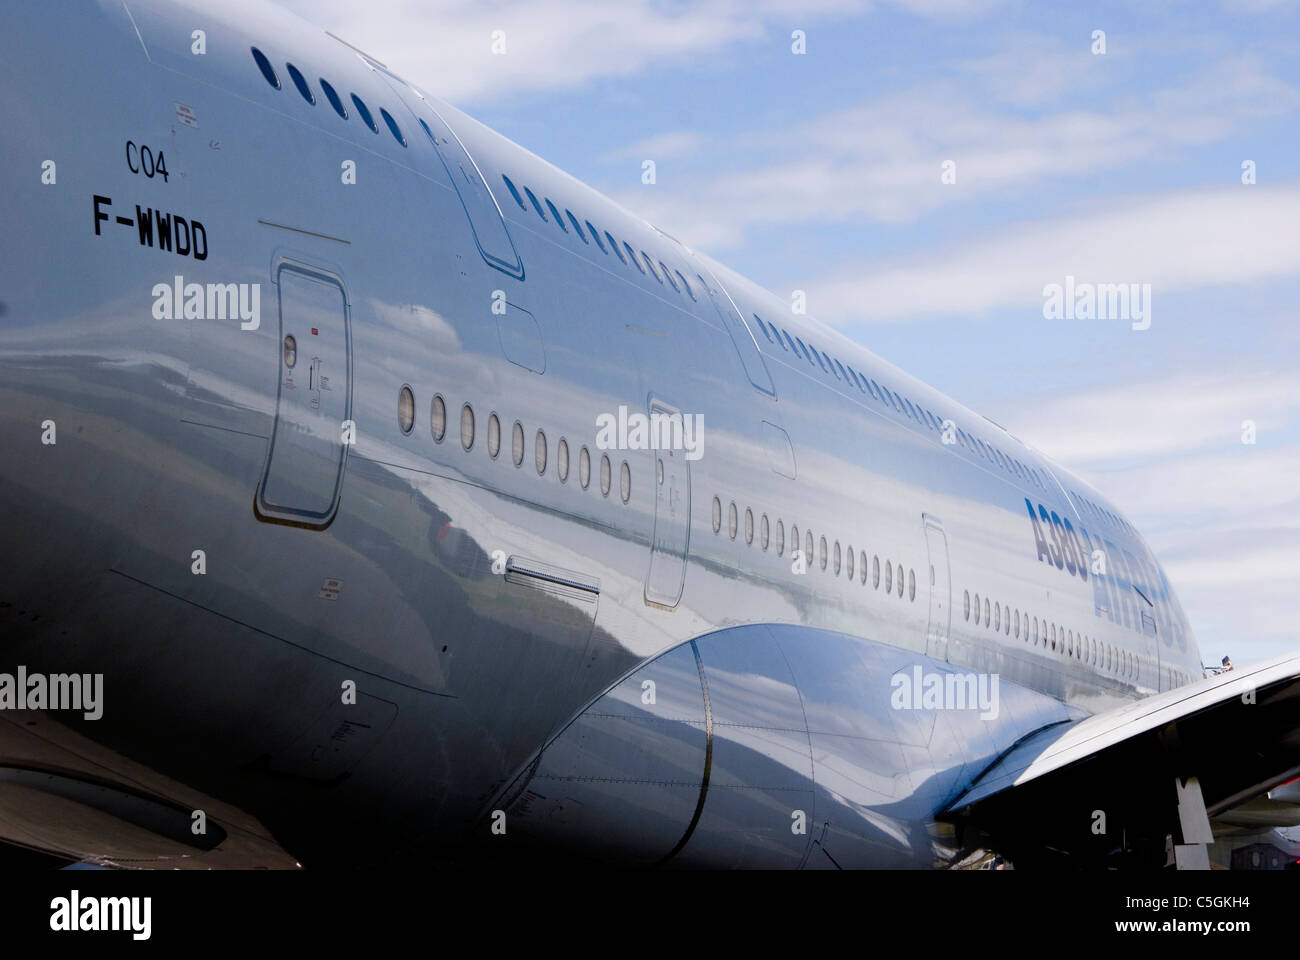 Reflections in the fuselage of an Airbus A380 passenger aircraft at the Farnborough Air Show Stock Photo